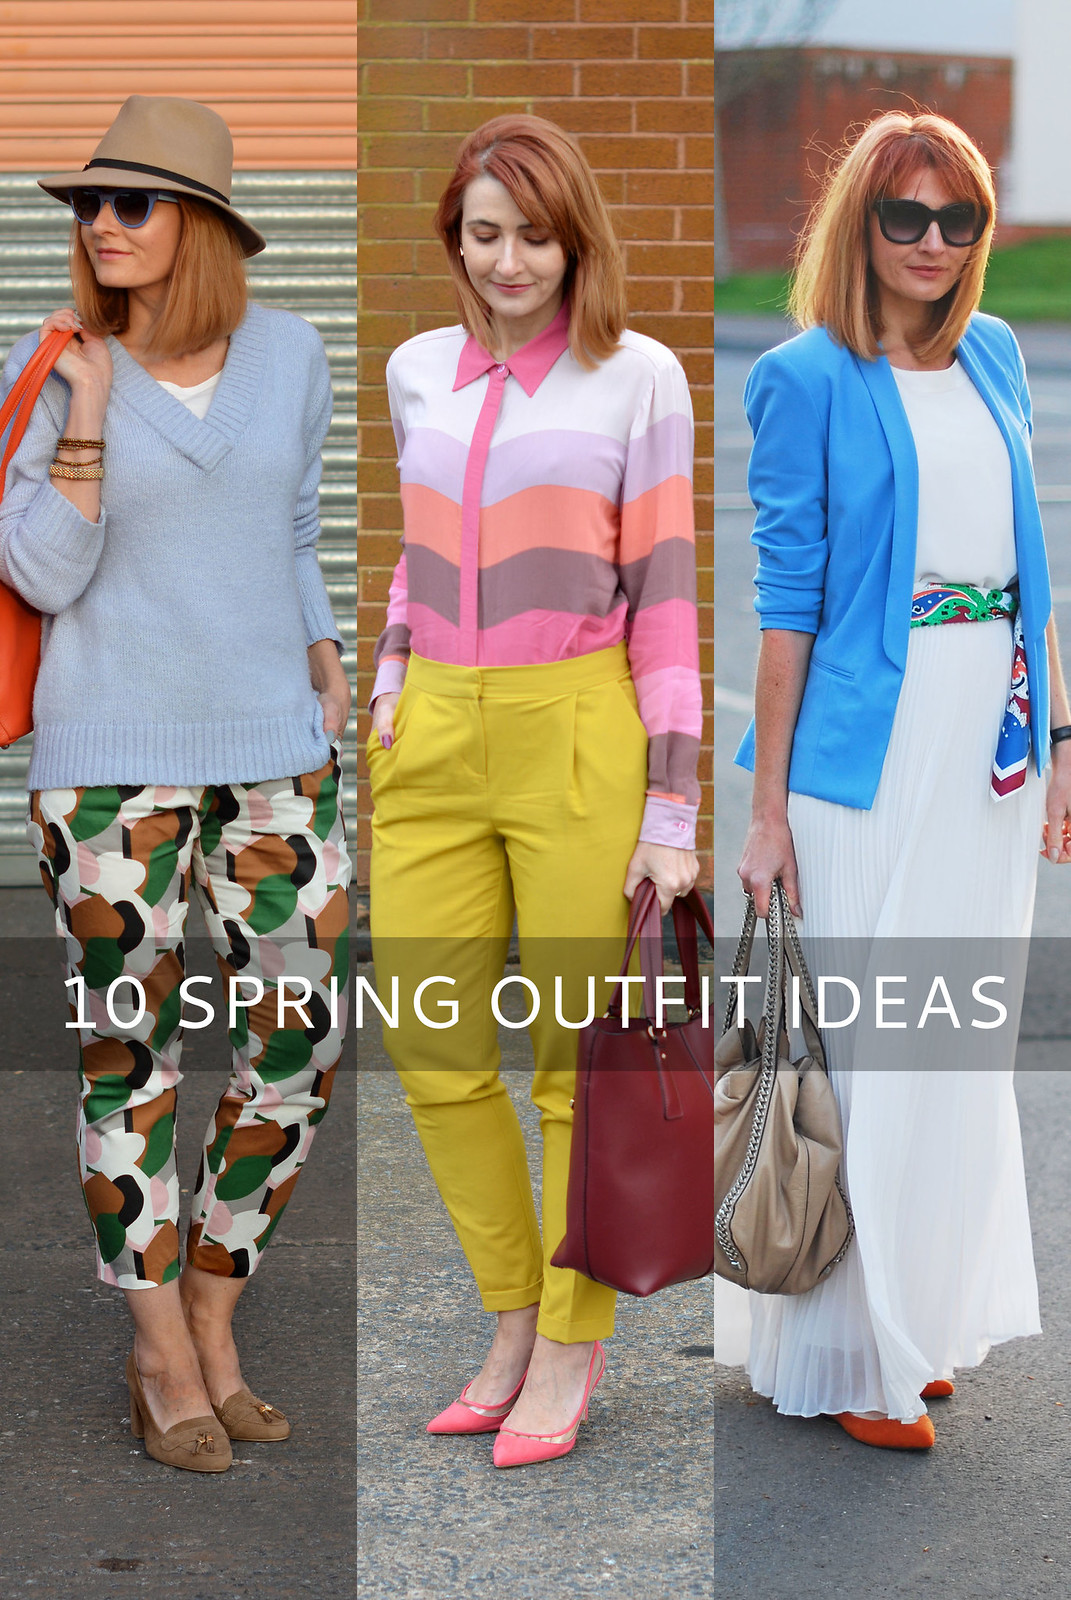 10 Spring Outfit Ideas (My Best of Season, Spring 2016) | Not Dressed As Lamb